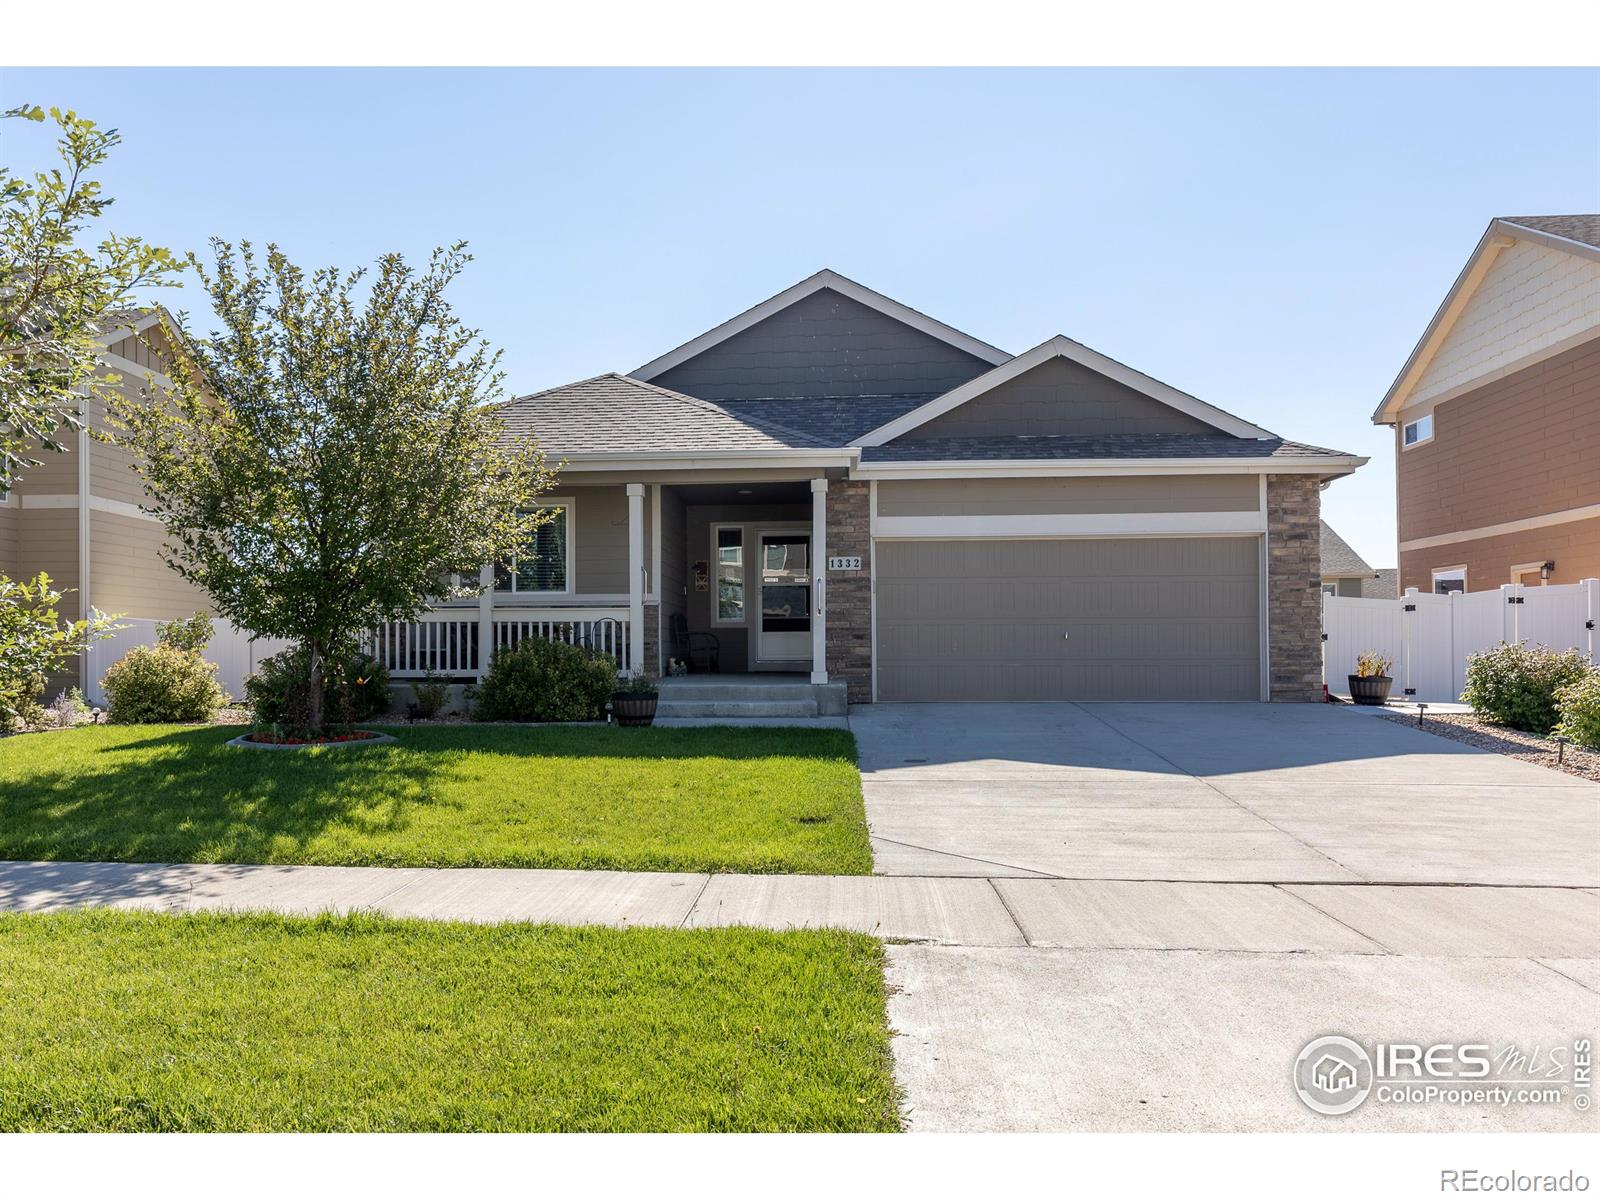 1332  86th Avenue, greeley MLS: 123456789995193 Beds: 4 Baths: 3 Price: $465,900